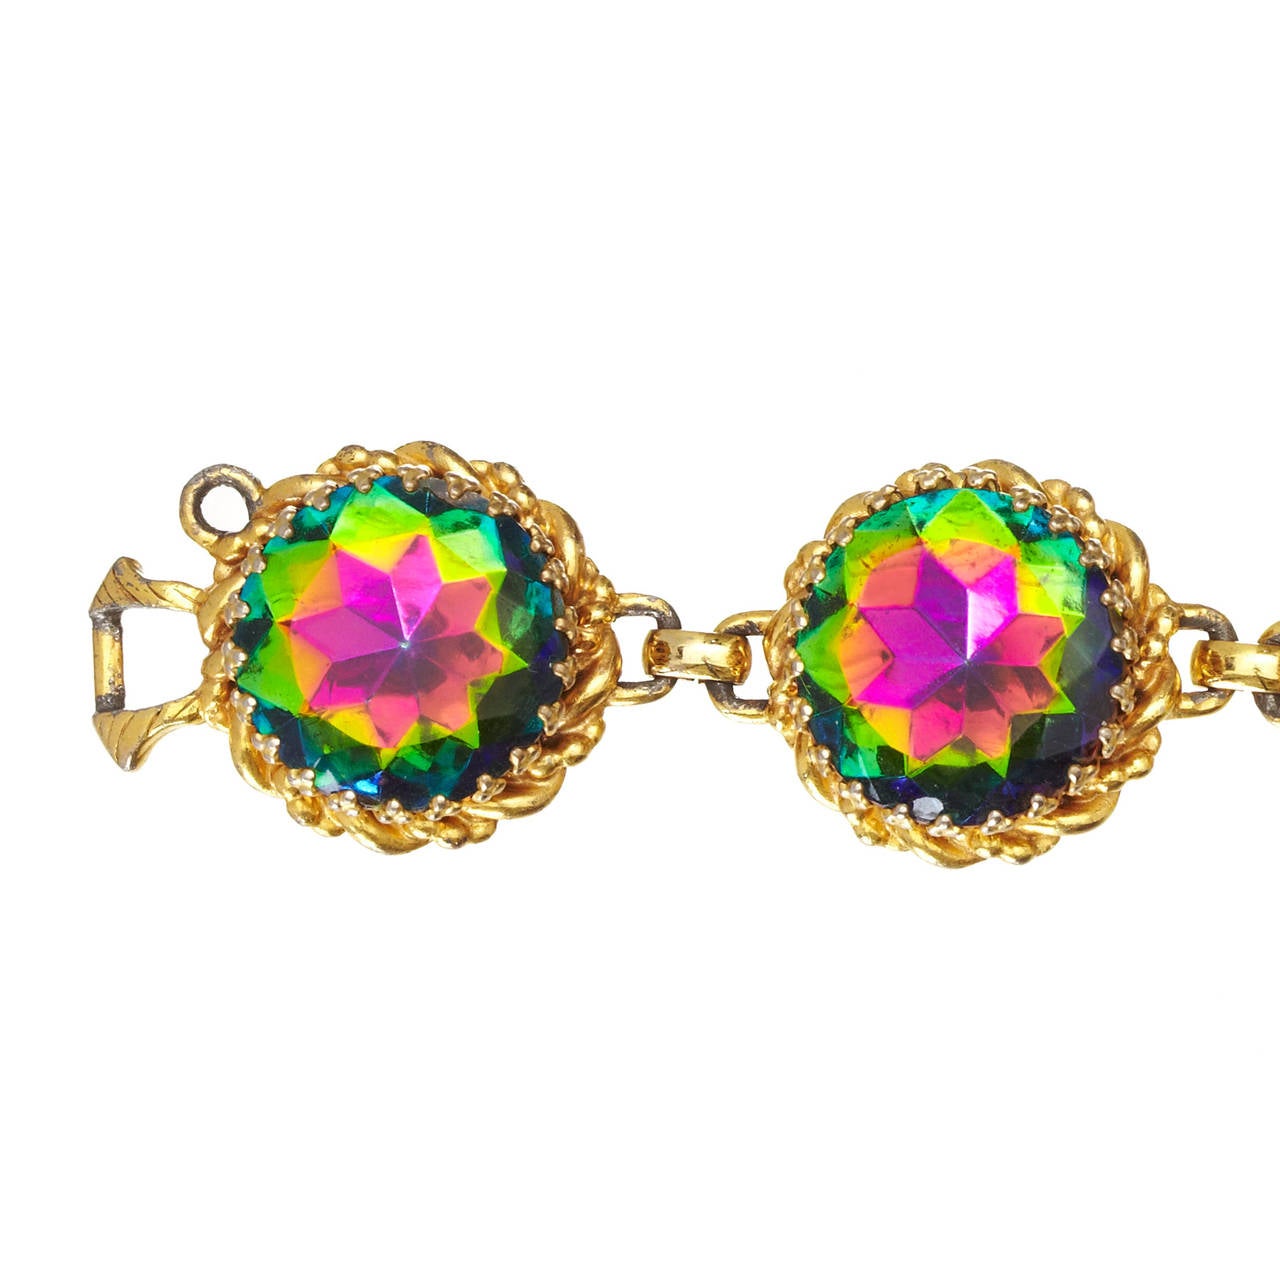 An iconic design by Schiaparelli this is the so called Watermelon Tourmaline bracelet and matching earrings.

The bracelet is made up of 6 large Vitrail Medium Swarovski crystals rhinestones set into gold plated crown settings, surrounded by a